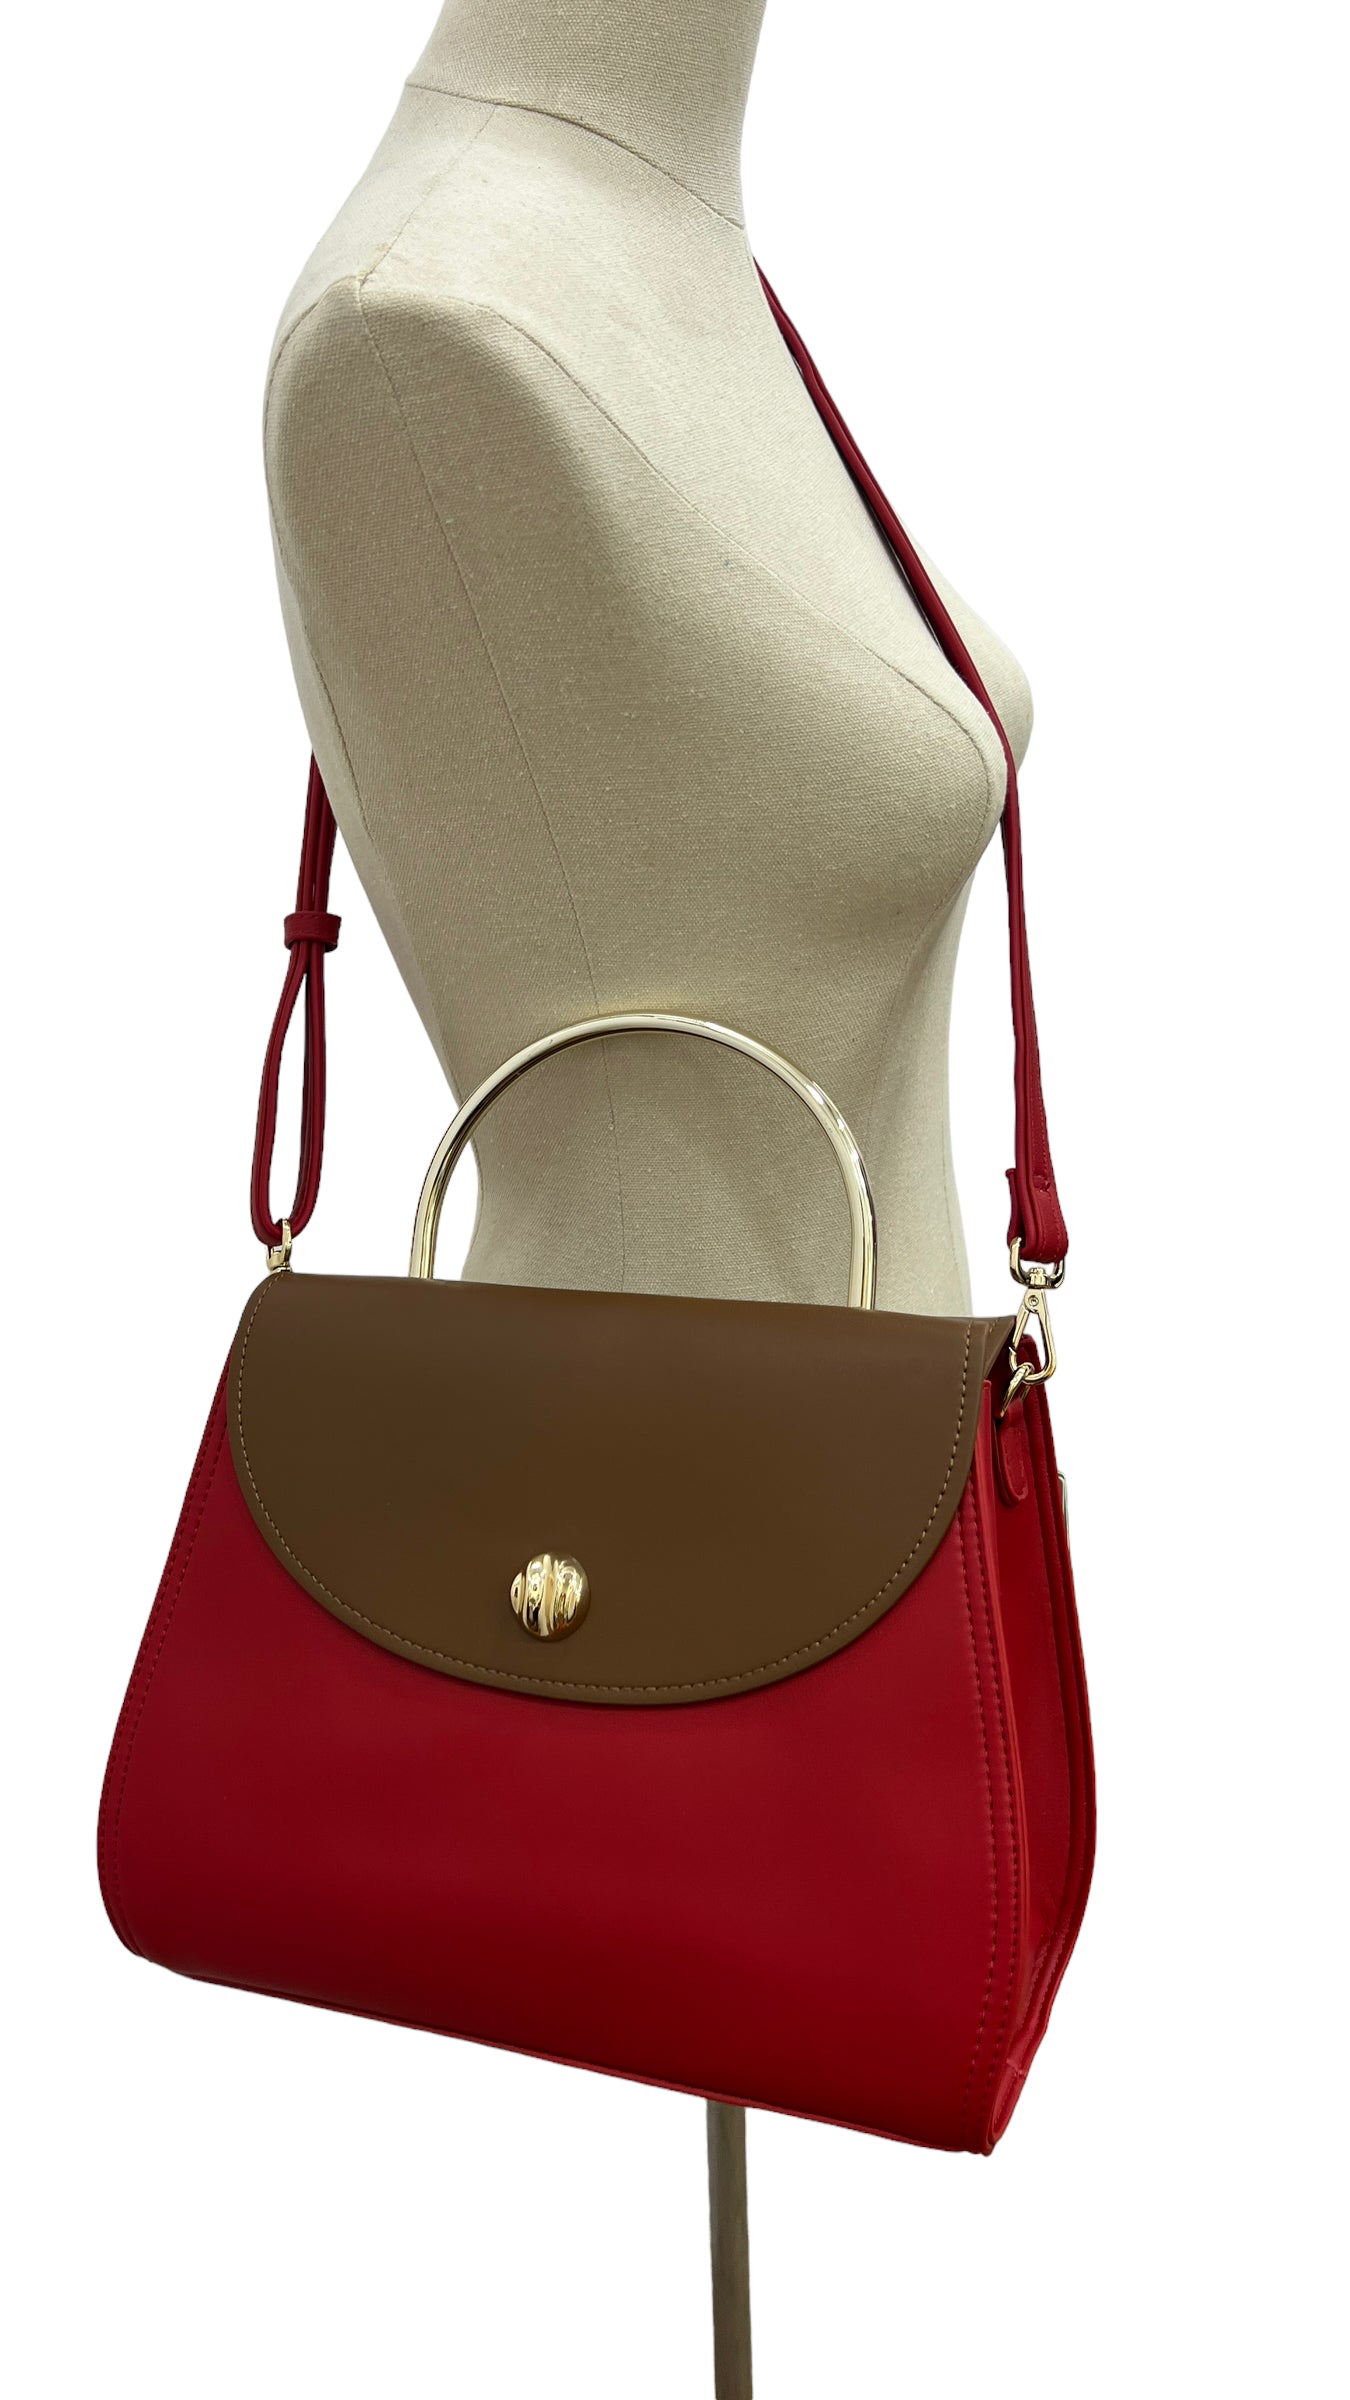 CHRISBELLA BROWN/RED METAL TOP HANDLE DOUBLE SIDED BAG